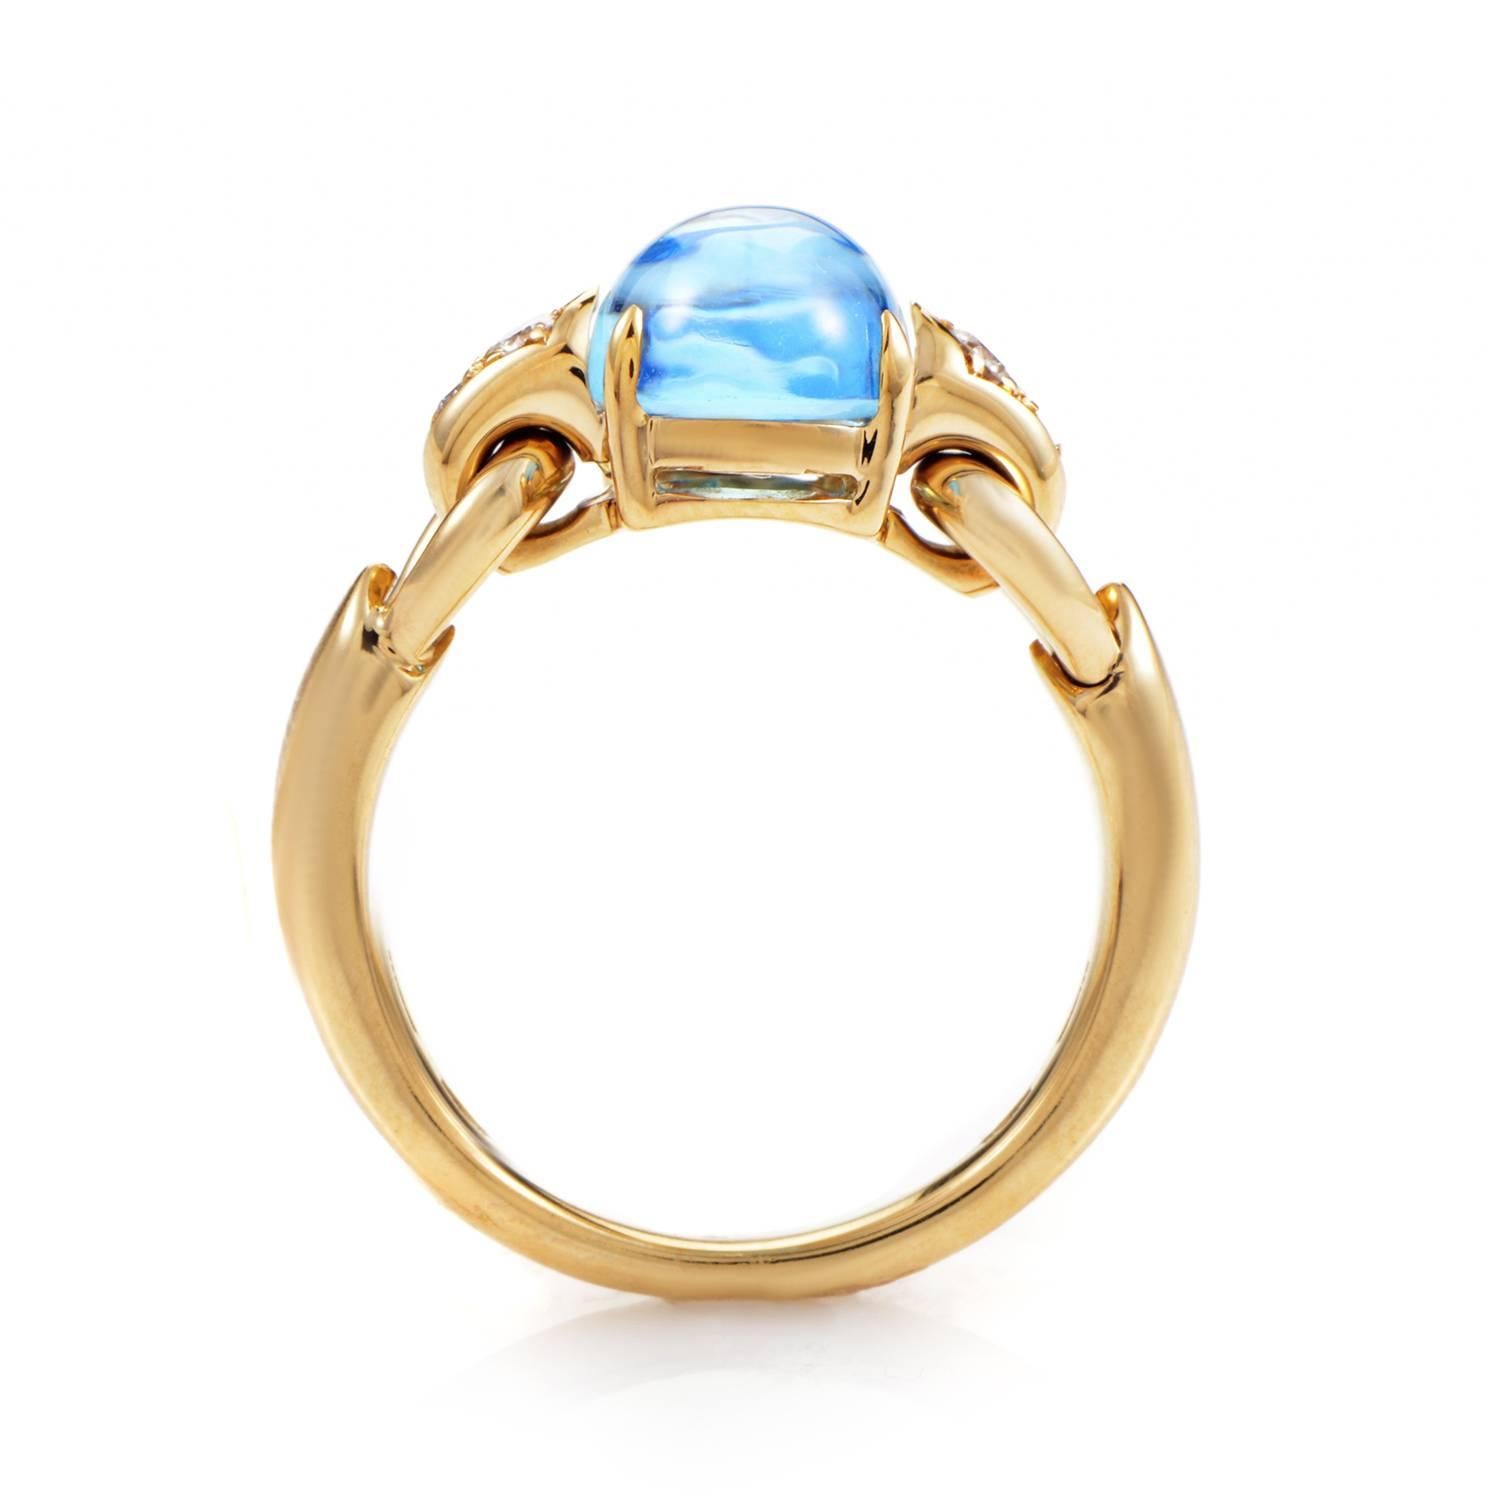 The 18K Yellow Gold band takes a pristine turn, rising from narrow beginnings into broader plains before its tide breaks into smoothly folded links. It is here at its cresting height where the ring risies into a swell of topaz, its oceanic hues